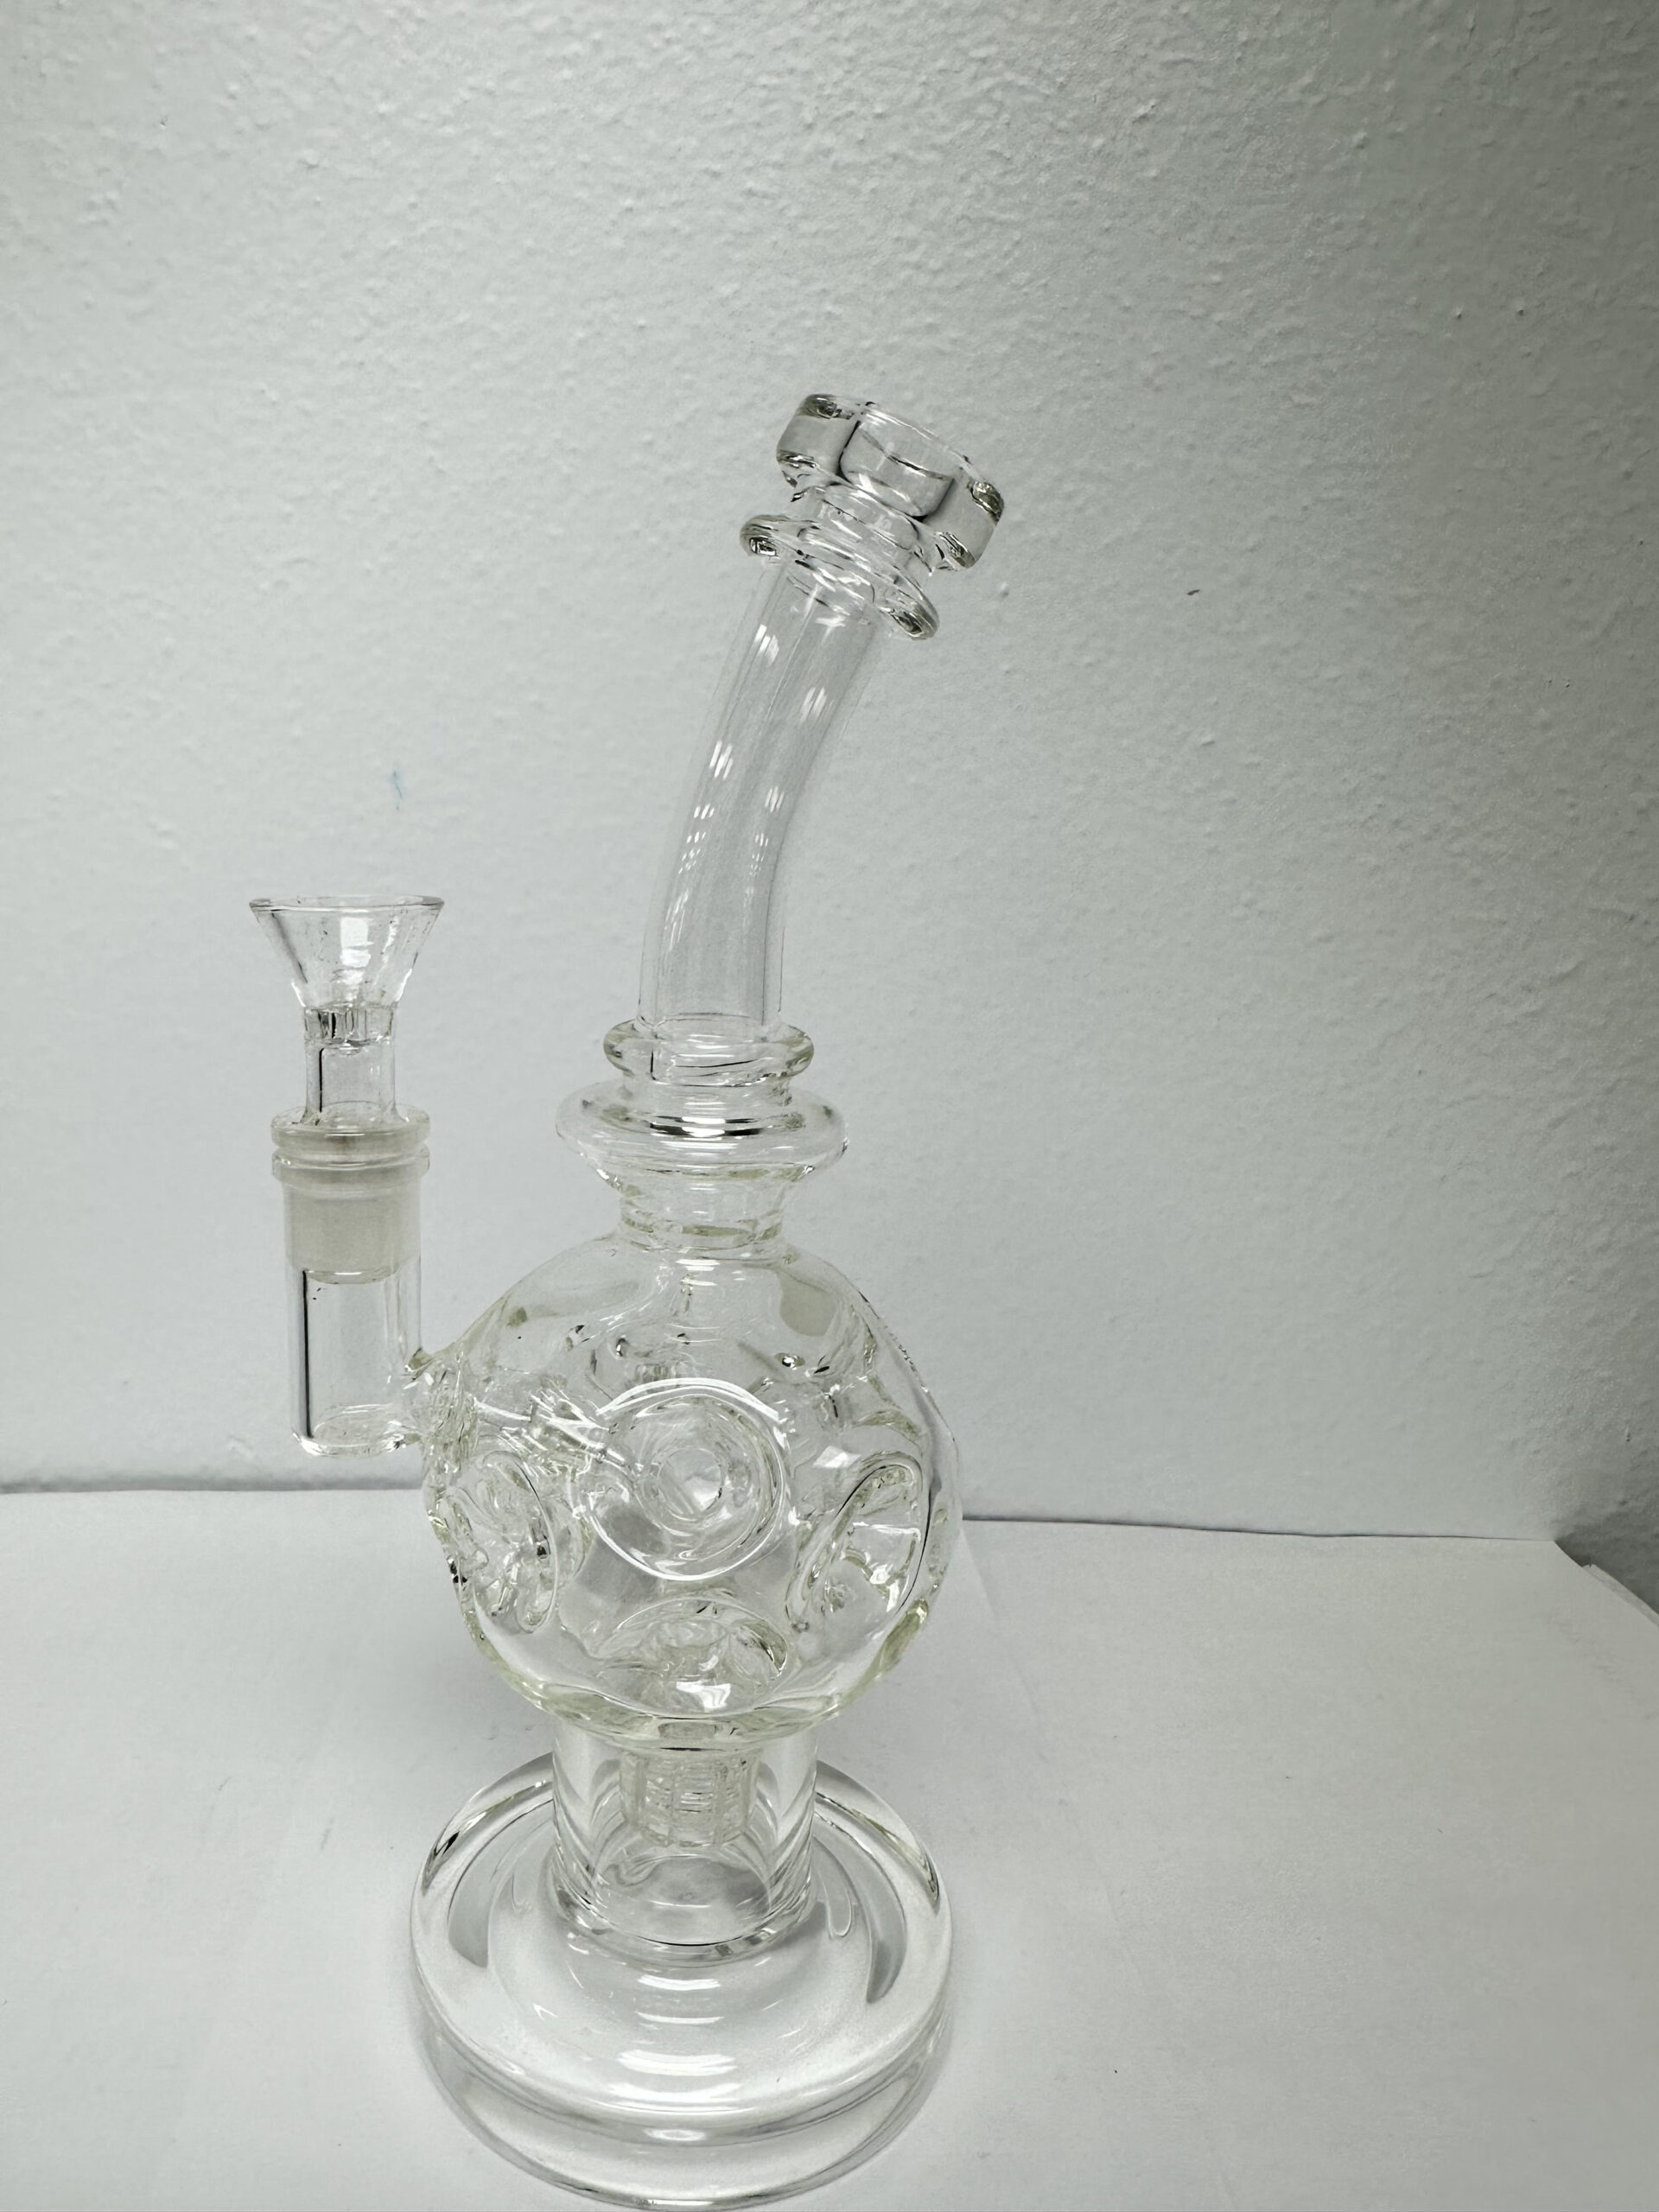  What are the disadvantages of smoking water pipes?